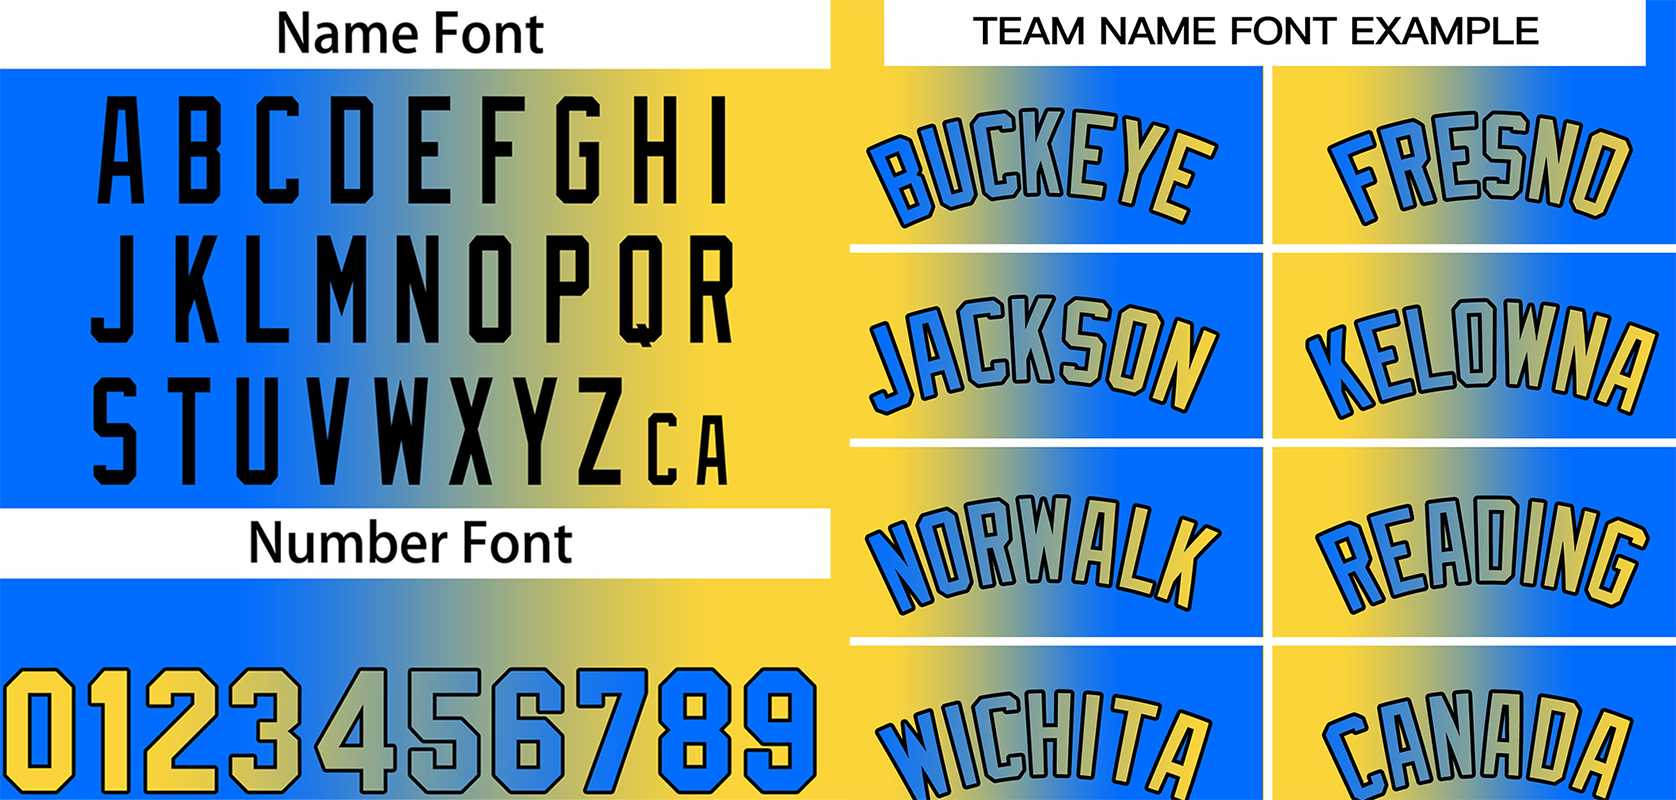 basketball jersey name font example